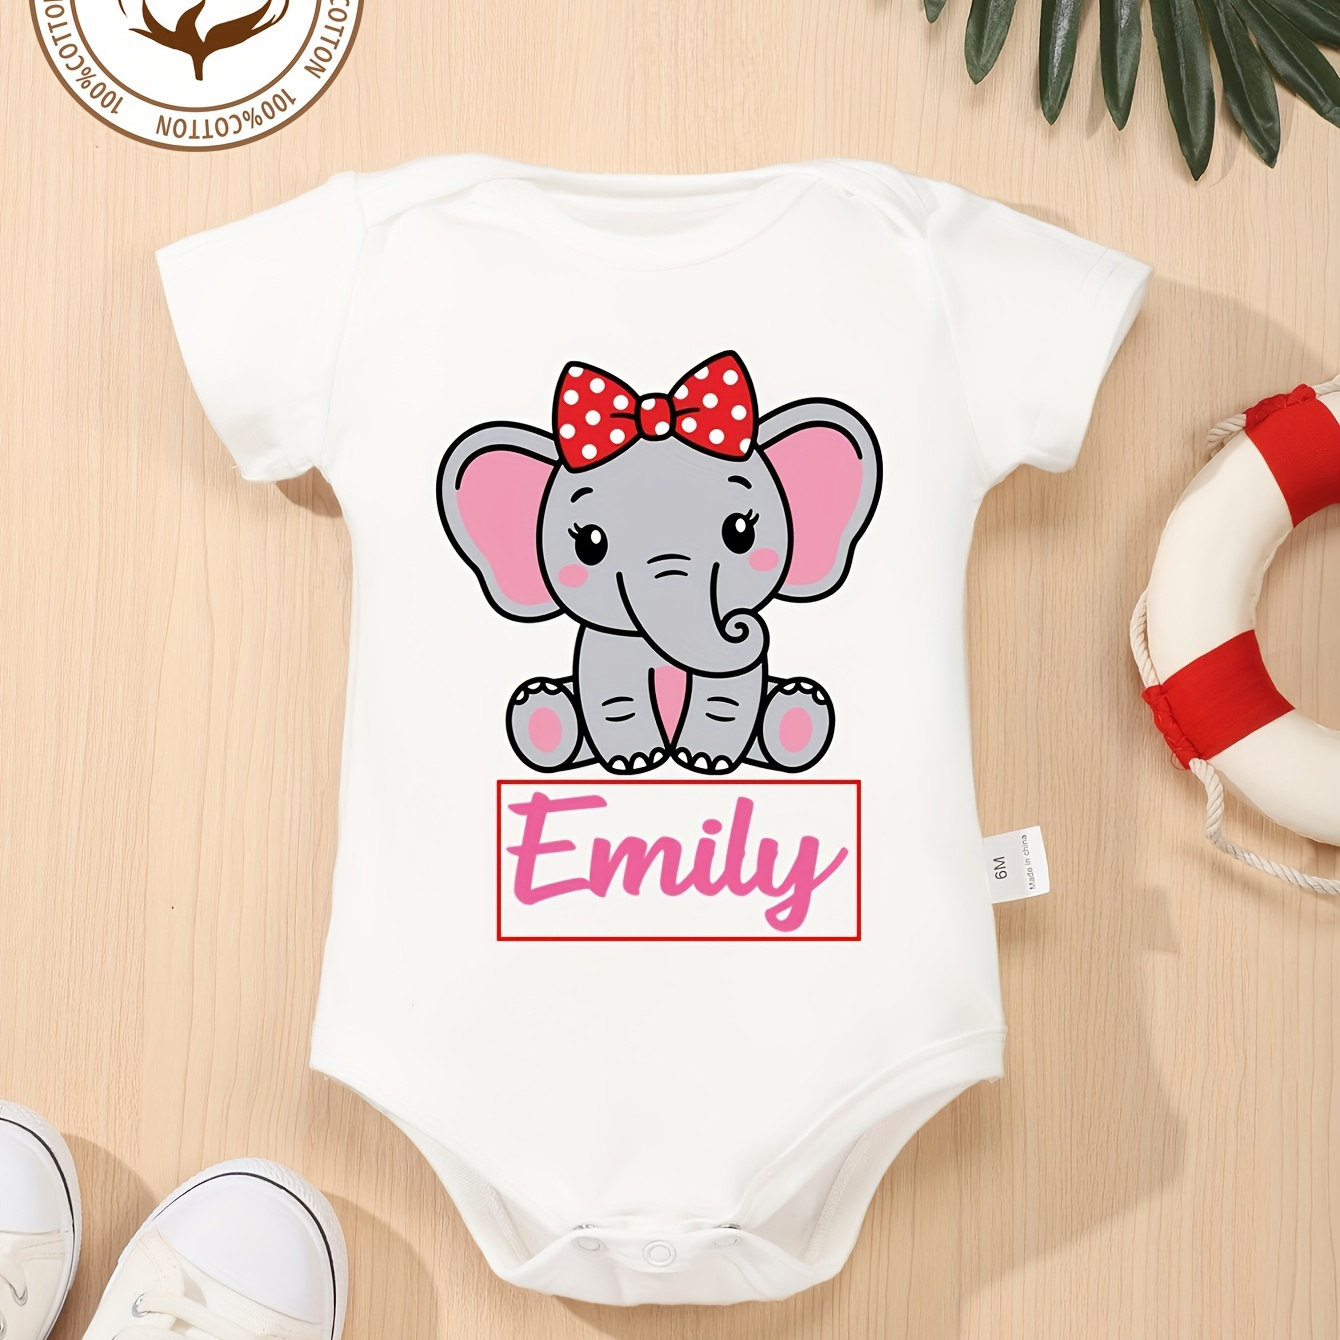 

Customized Baby Girl's Bodysuit, "......" Letter Customization & Bowknot Elephant Print Cotton Onesies, Comfy Casual Round Neck Romper For Infants & Toddlers